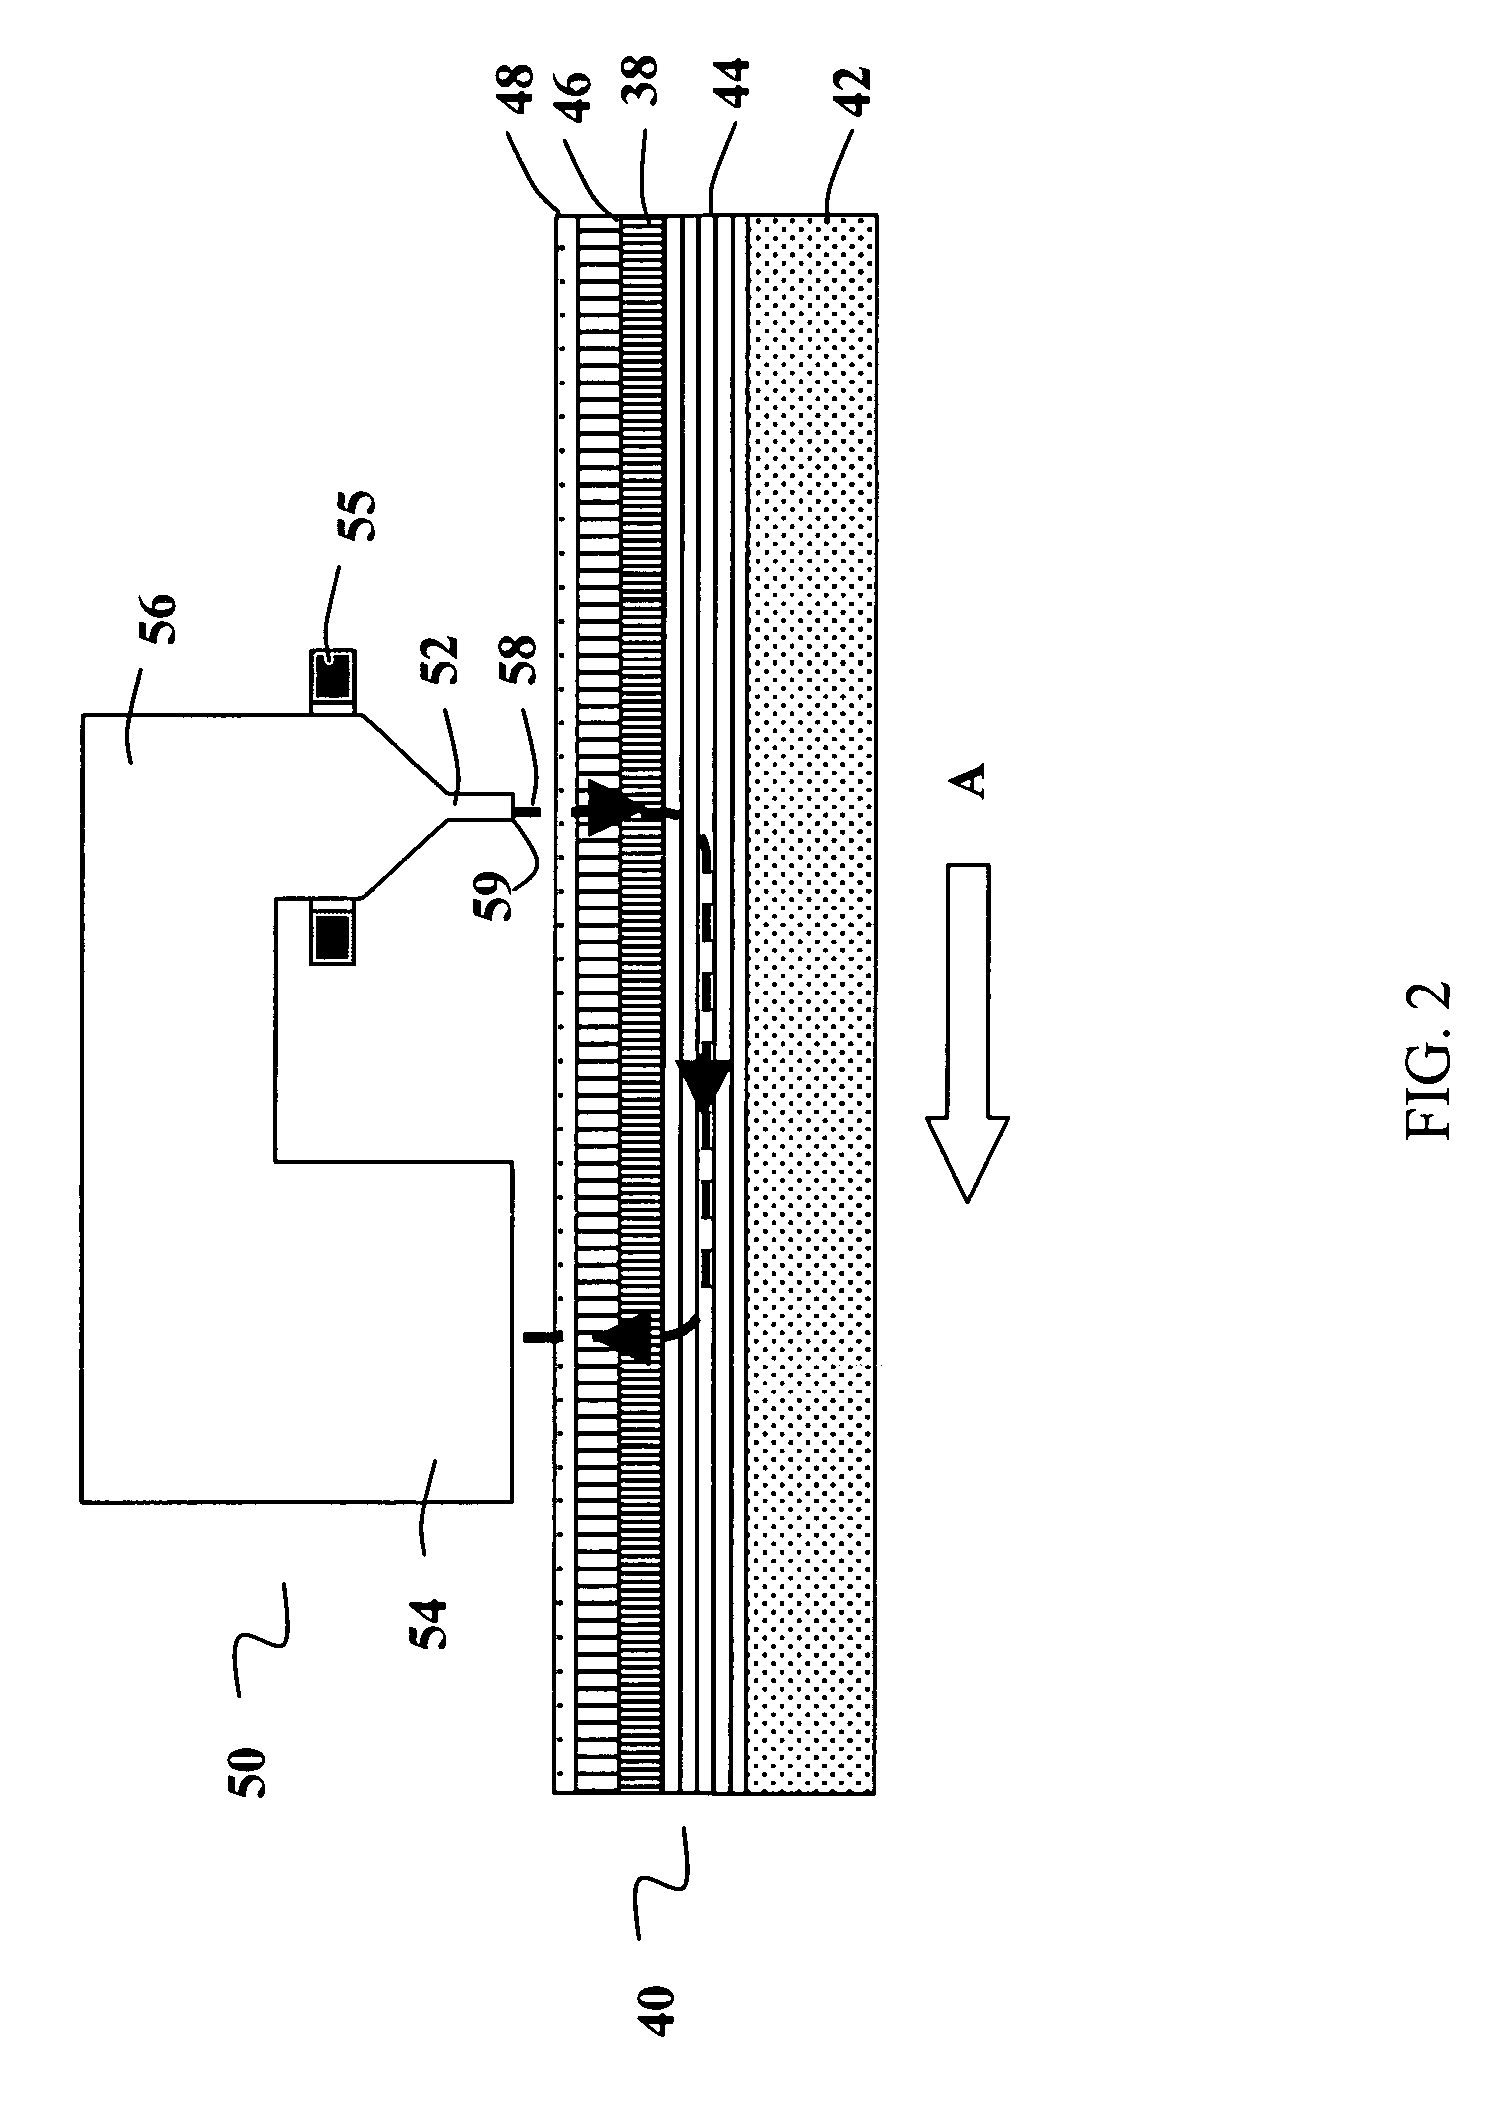 Composite magnetic recording structure having a metamagnetic layer with field induced transition to ferromagnetic state